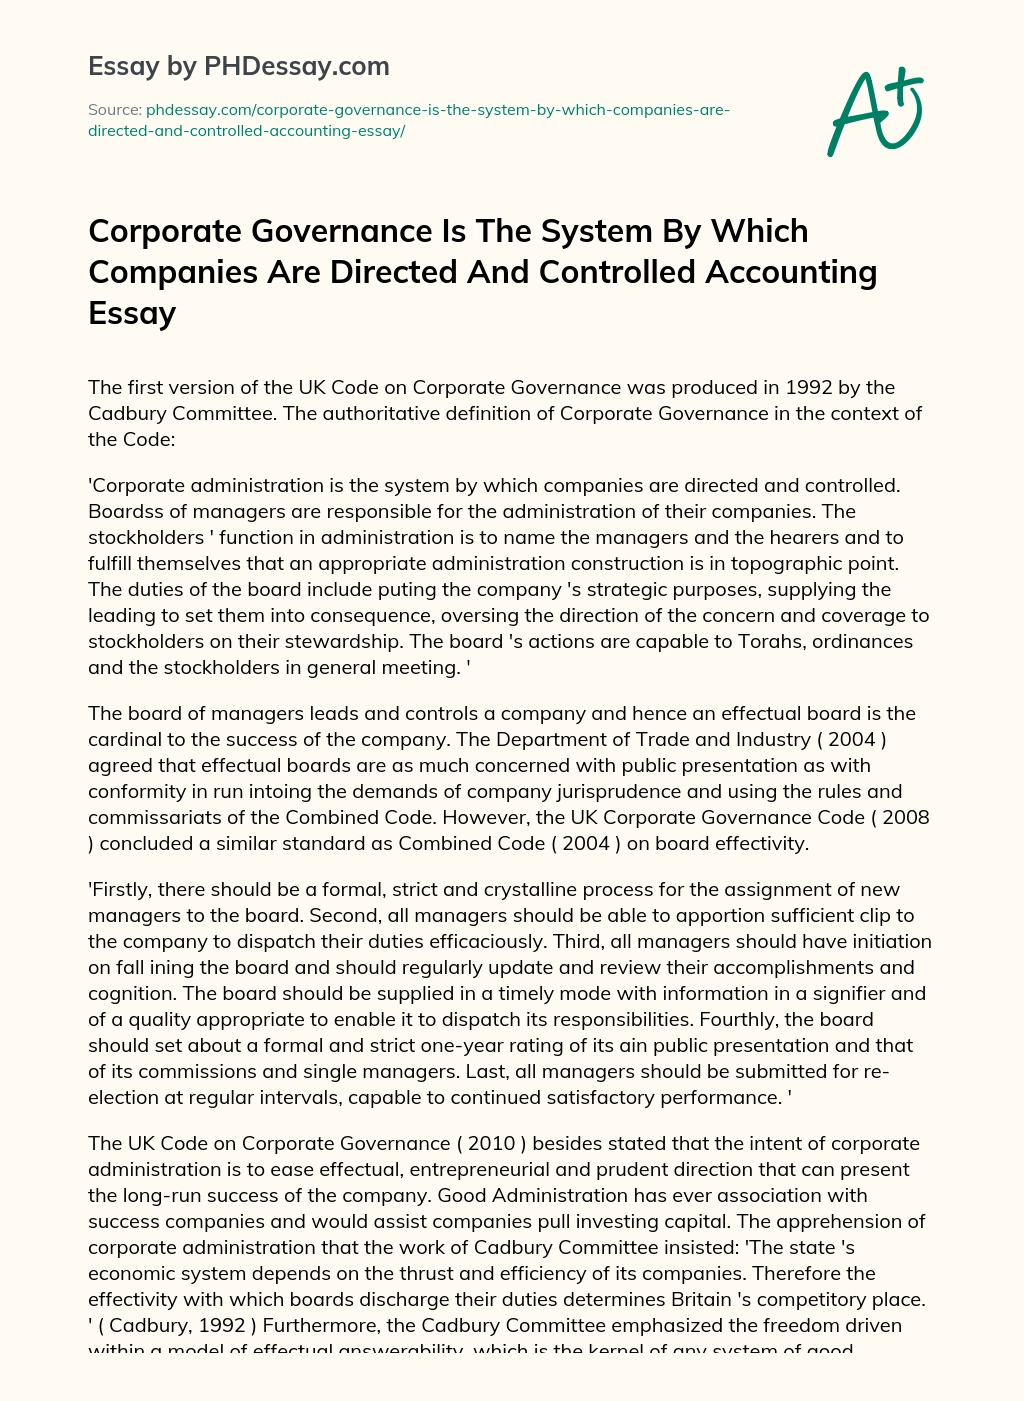 Corporate Governance Is The System By Which Companies Are Directed And Controlled Accounting Essay essay